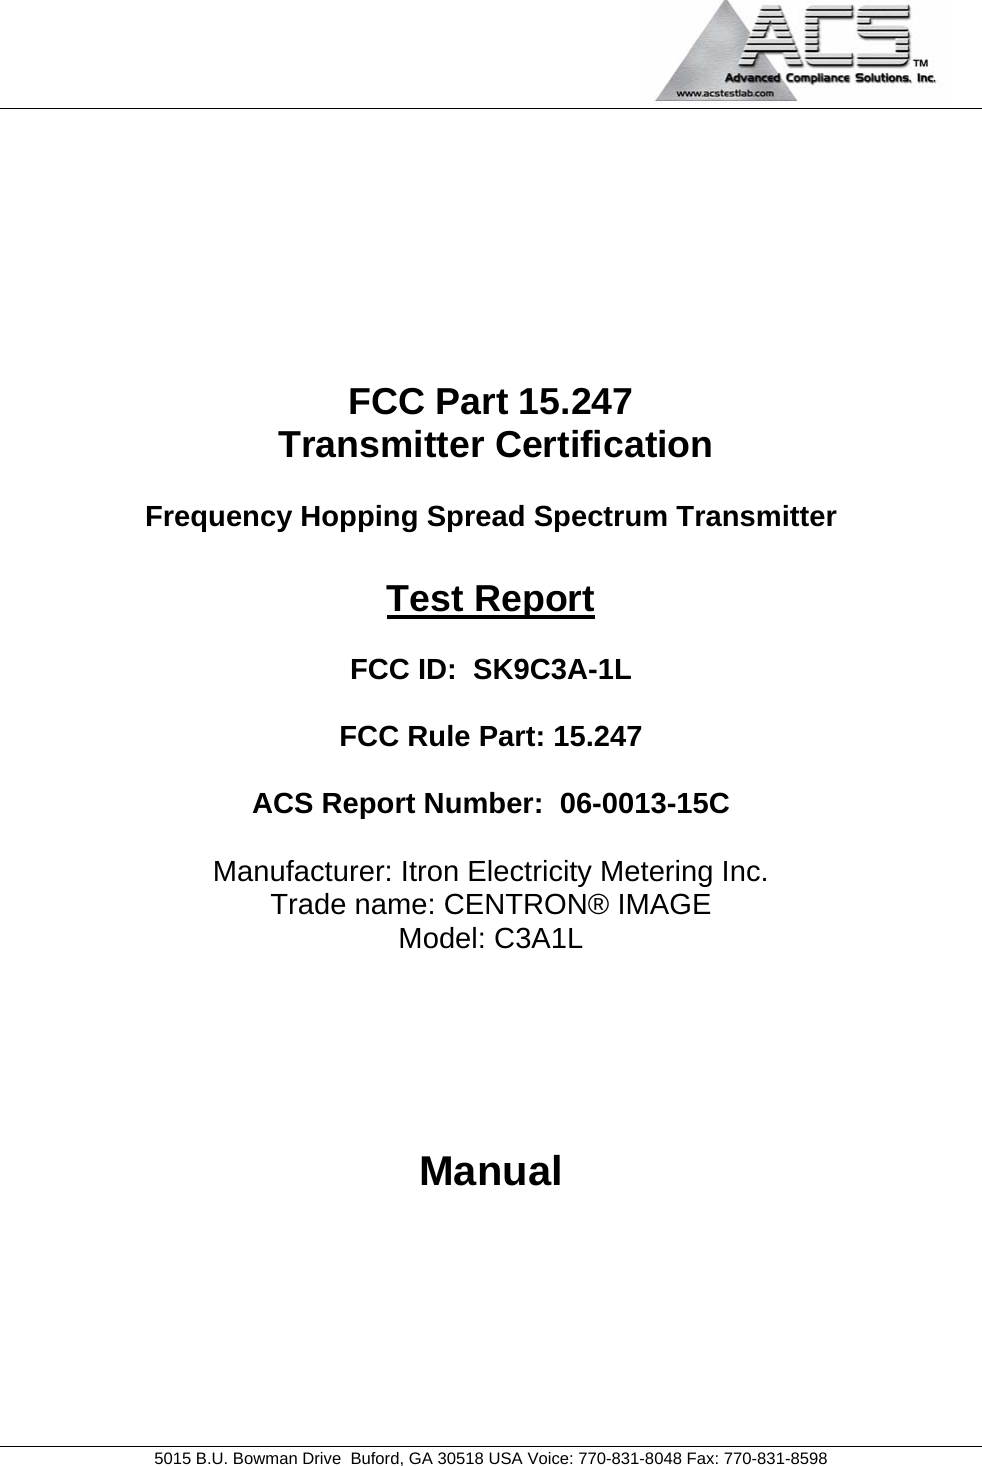                                             5015 B.U. Bowman Drive  Buford, GA 30518 USA Voice: 770-831-8048 Fax: 770-831-8598        FCC Part 15.247  Transmitter Certification  Frequency Hopping Spread Spectrum Transmitter  Test Report  FCC ID:  SK9C3A-1L  FCC Rule Part: 15.247  ACS Report Number:  06-0013-15C   Manufacturer: Itron Electricity Metering Inc. Trade name: CENTRON® IMAGE Model: C3A1L     Manual     